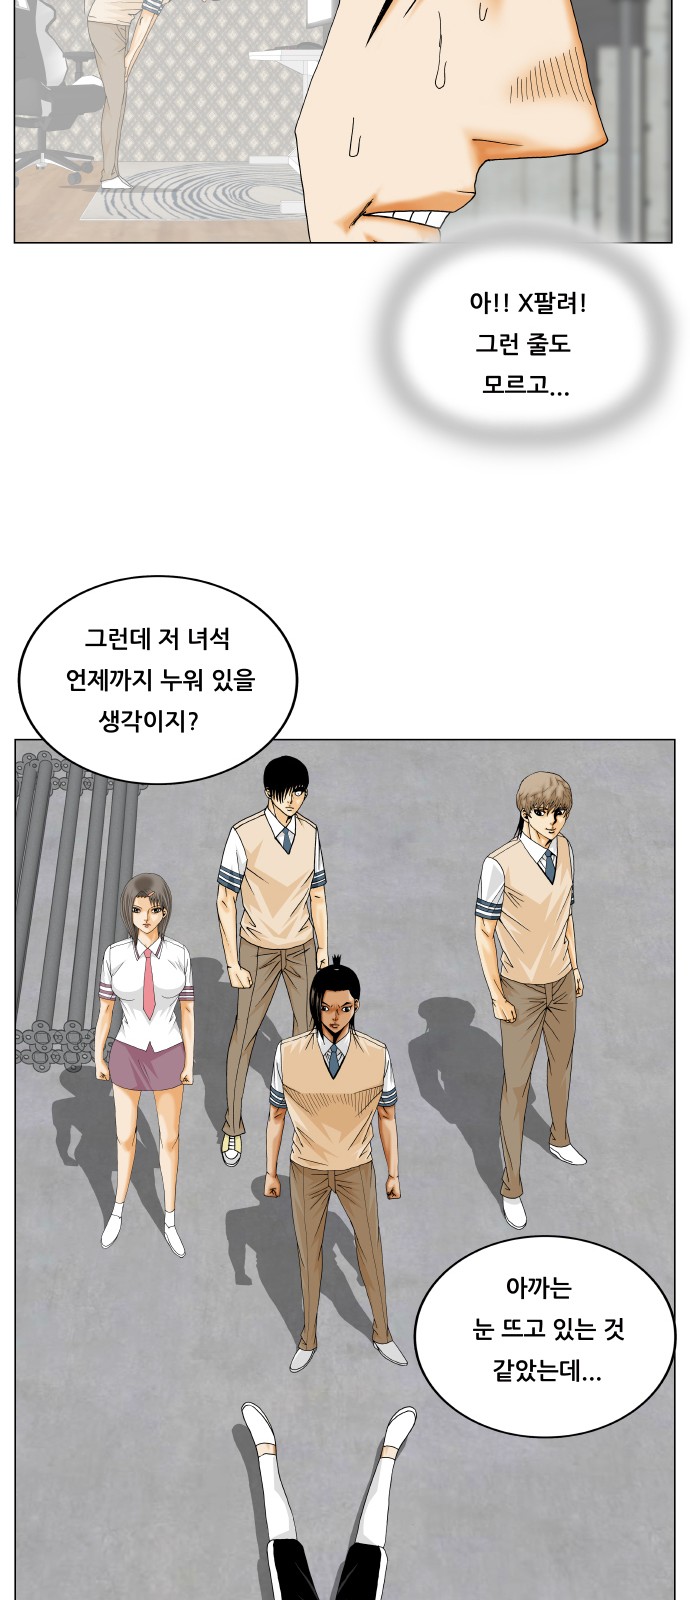 Ultimate Legend - Kang Hae Hyo - Chapter 357 - Page 47